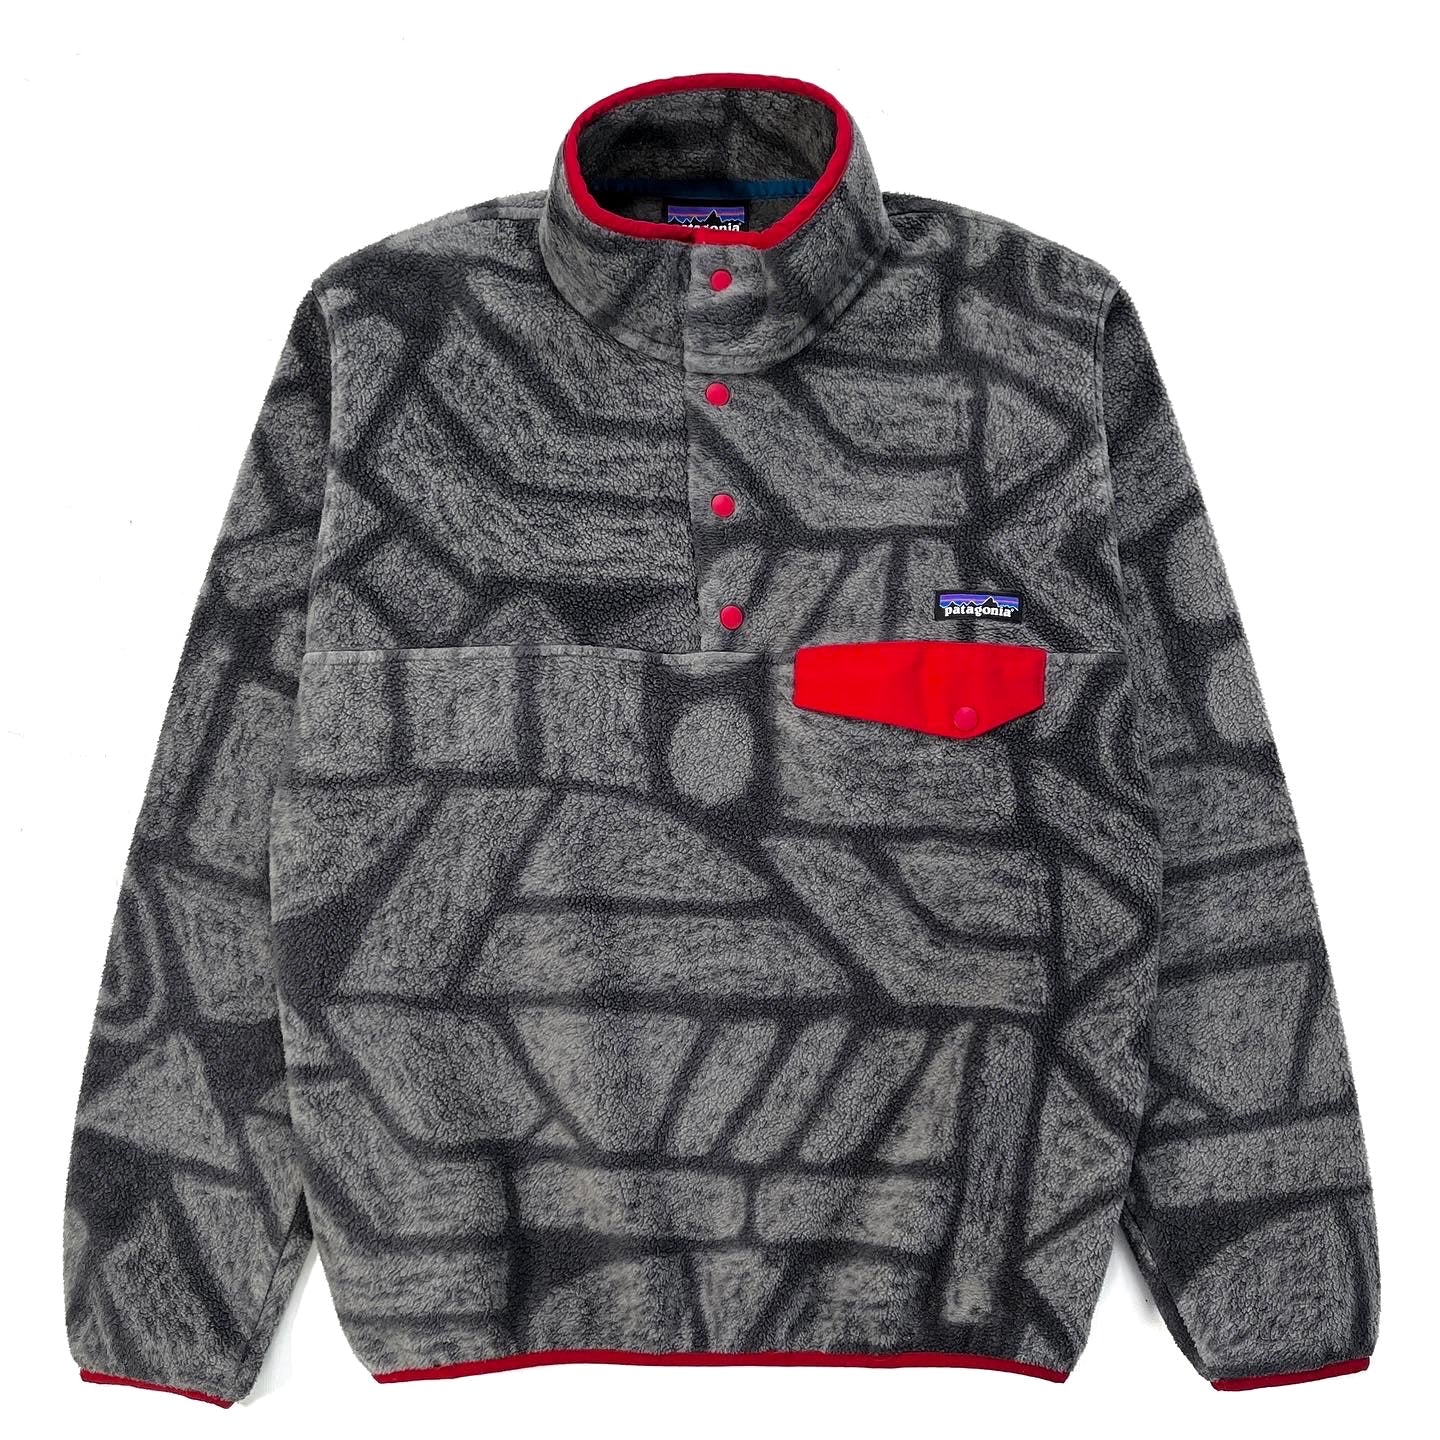 2015 Patagonia Printed Synchilla Snap-T, Shale: Forge Grey (S)